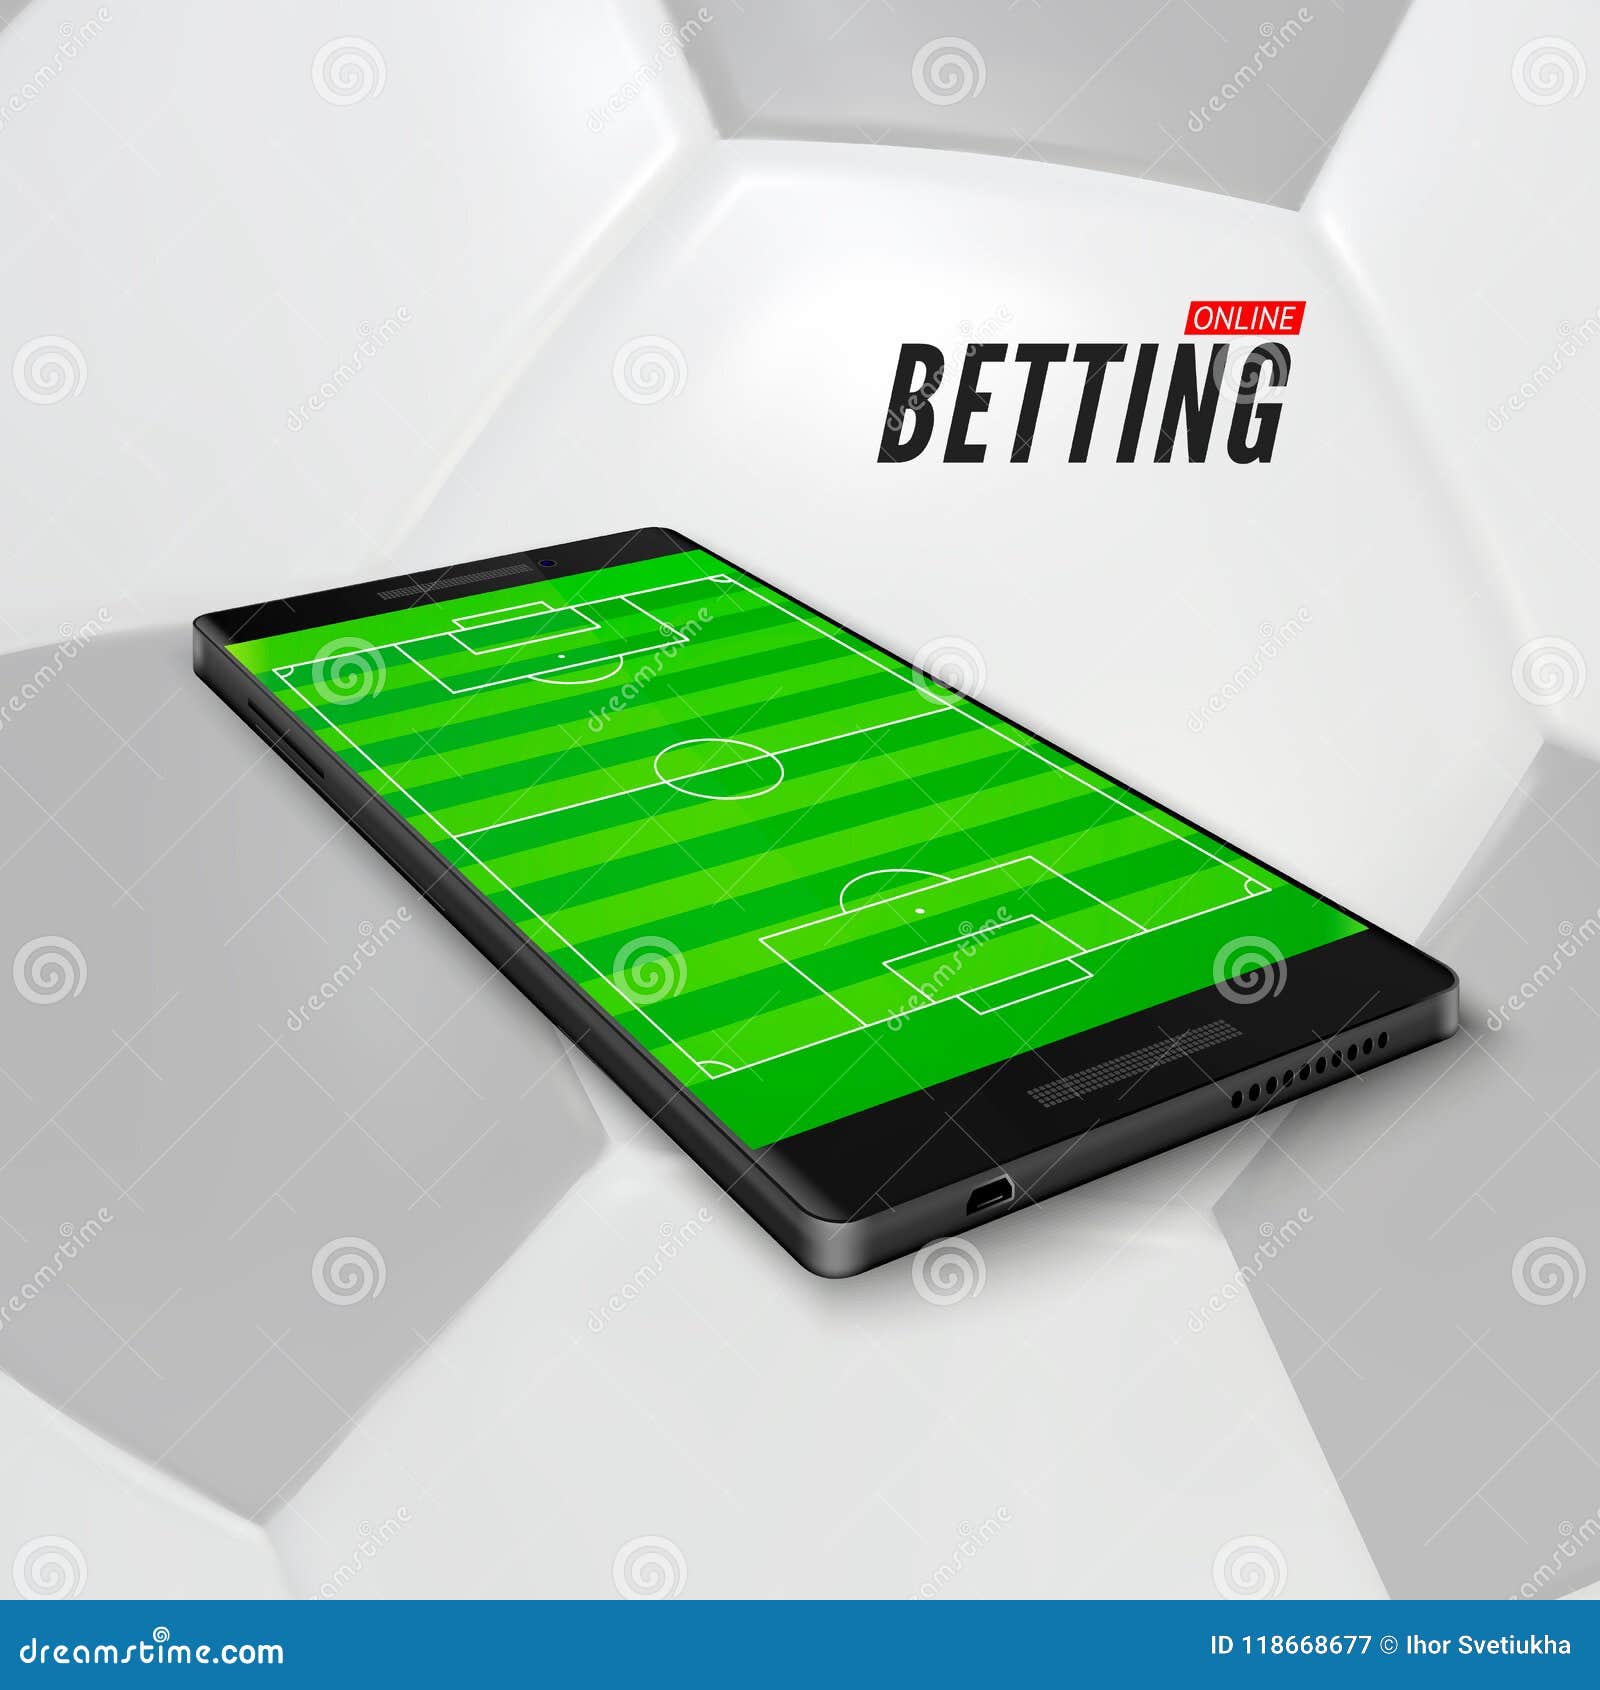 Who Else Wants To Enjoy Sports Betting App